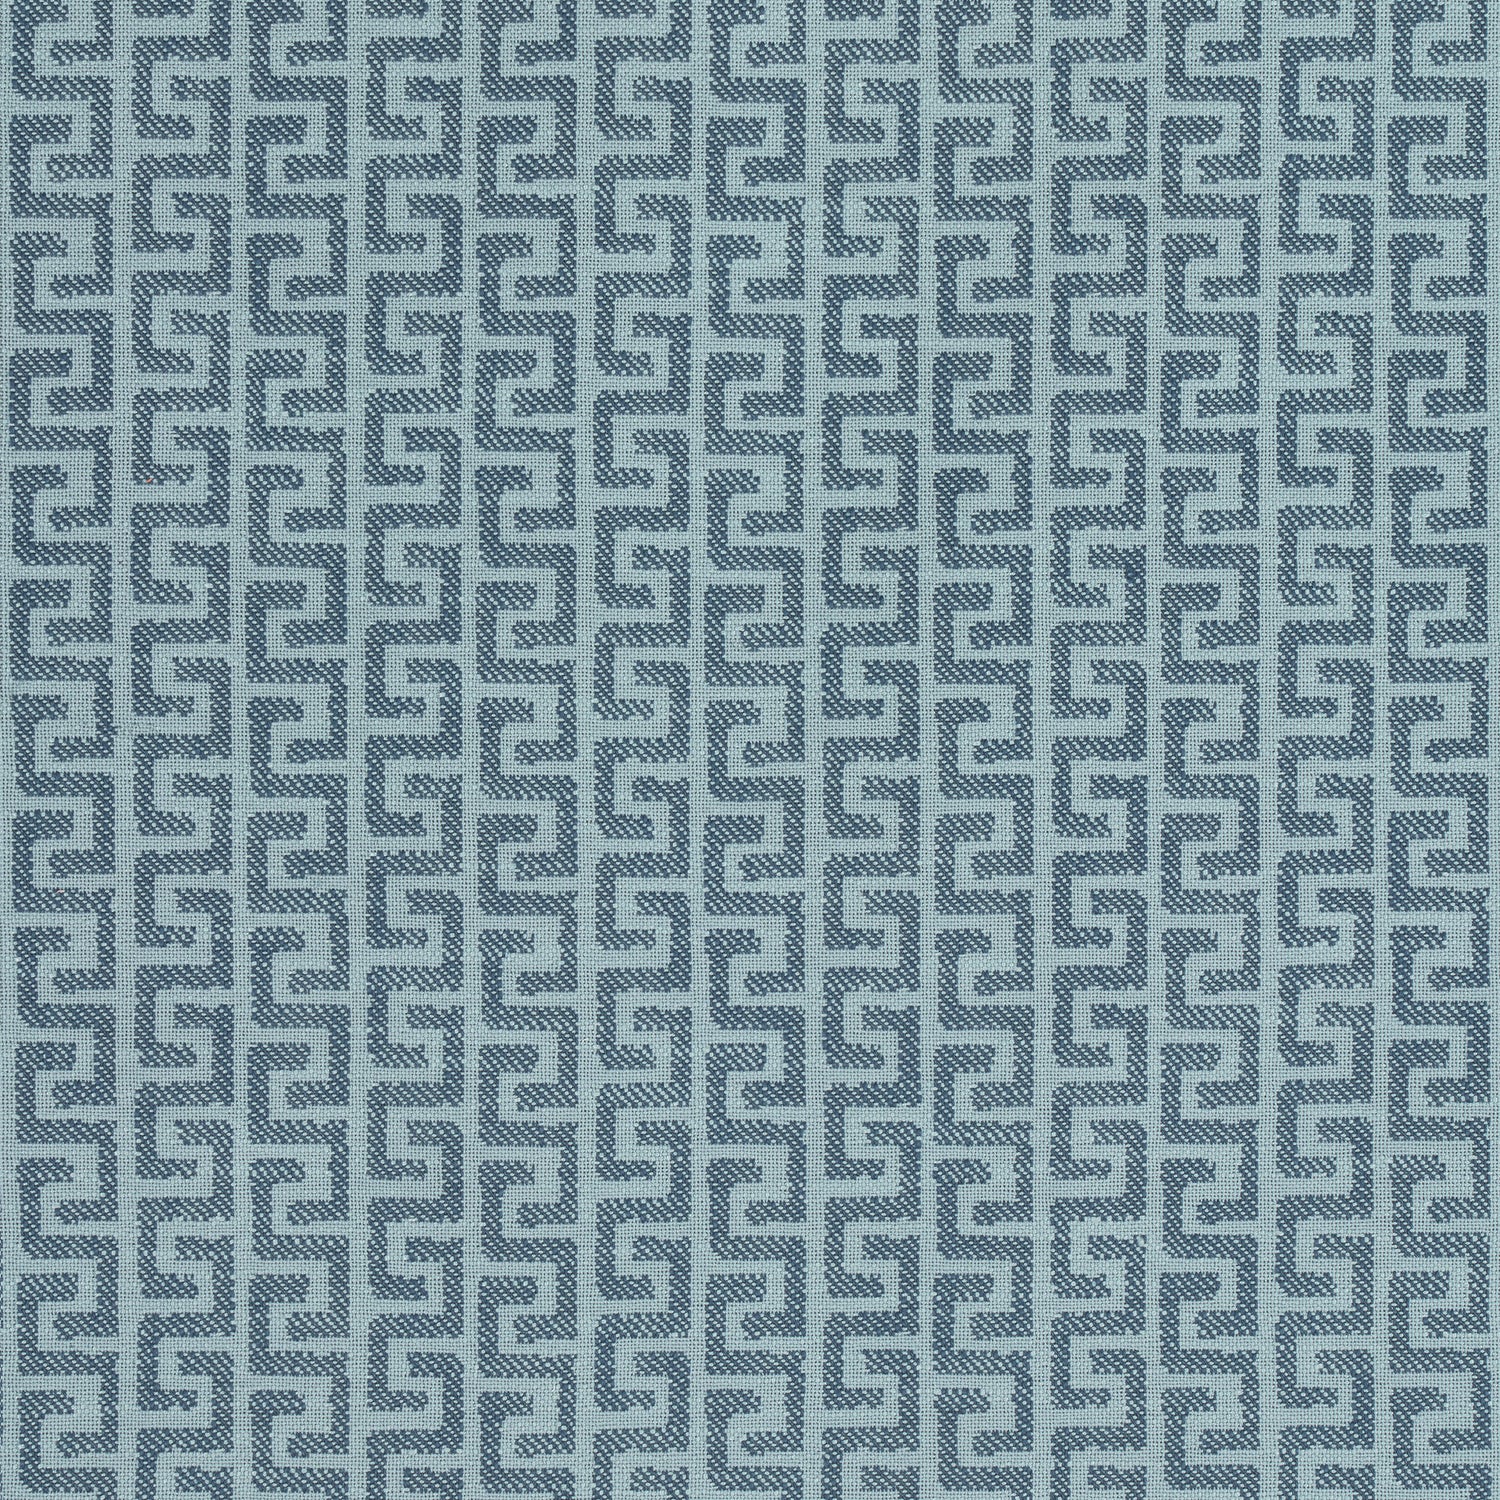 Merritt fabric in lake color - pattern number W74249 - by Thibaut in the Passage collection